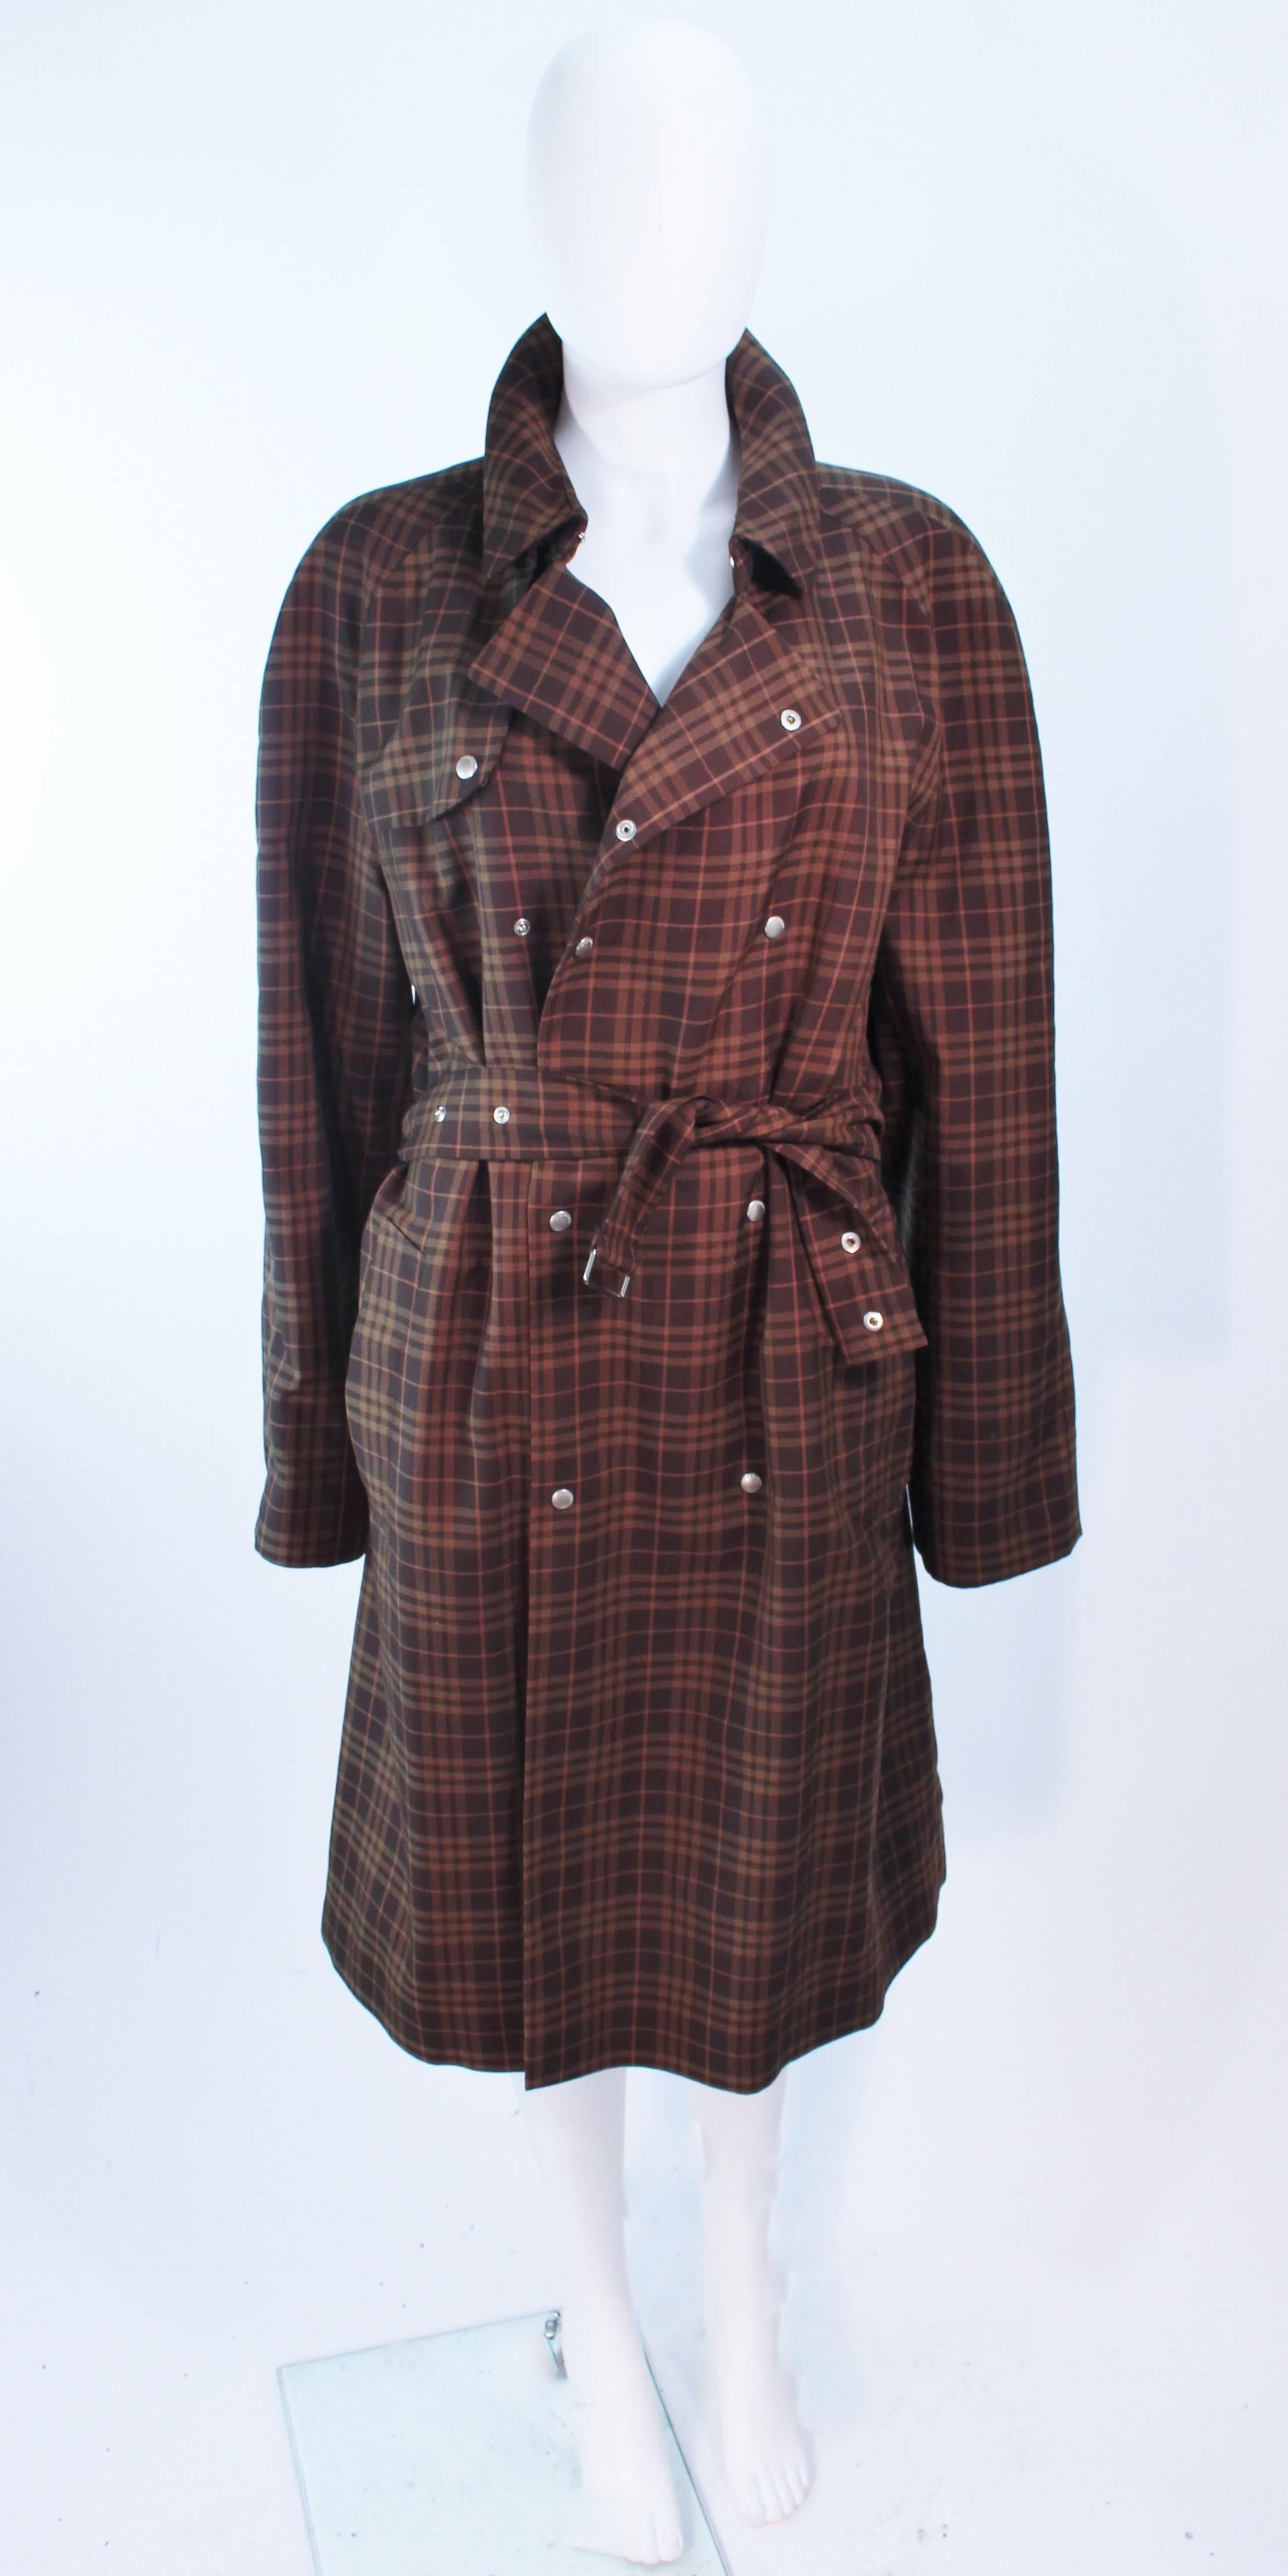 This Burberry coat is composed of a chocolate brown and drab hue plaid.  Has center front snap closures with a double breasted style and belt  In excellent vintage condition.

**Please cross-reference measurements for personal accuracy. Size in